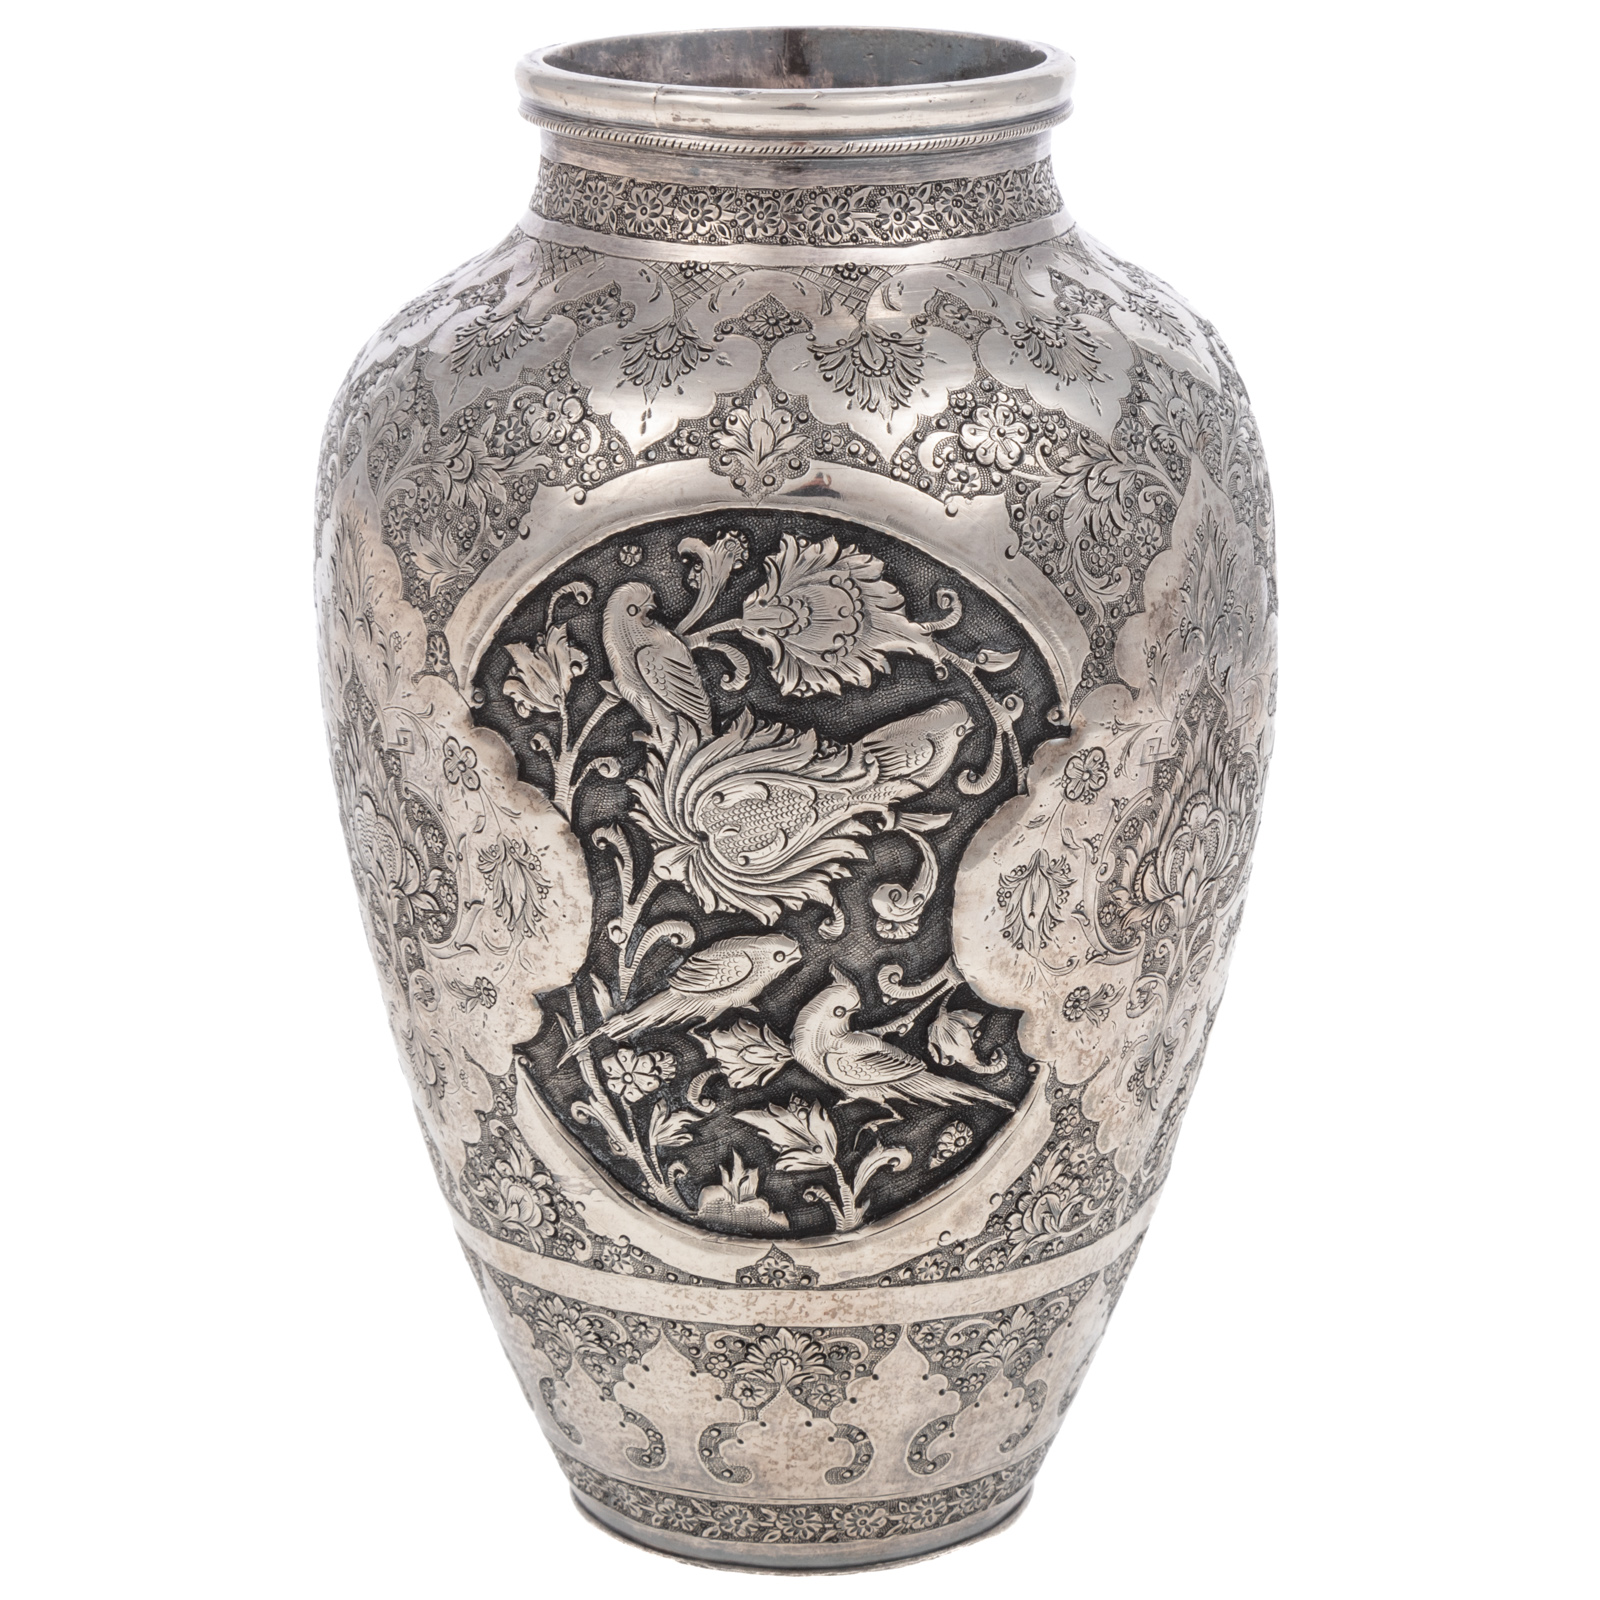 PERSIAN SILVER VASE Early to mid-20th